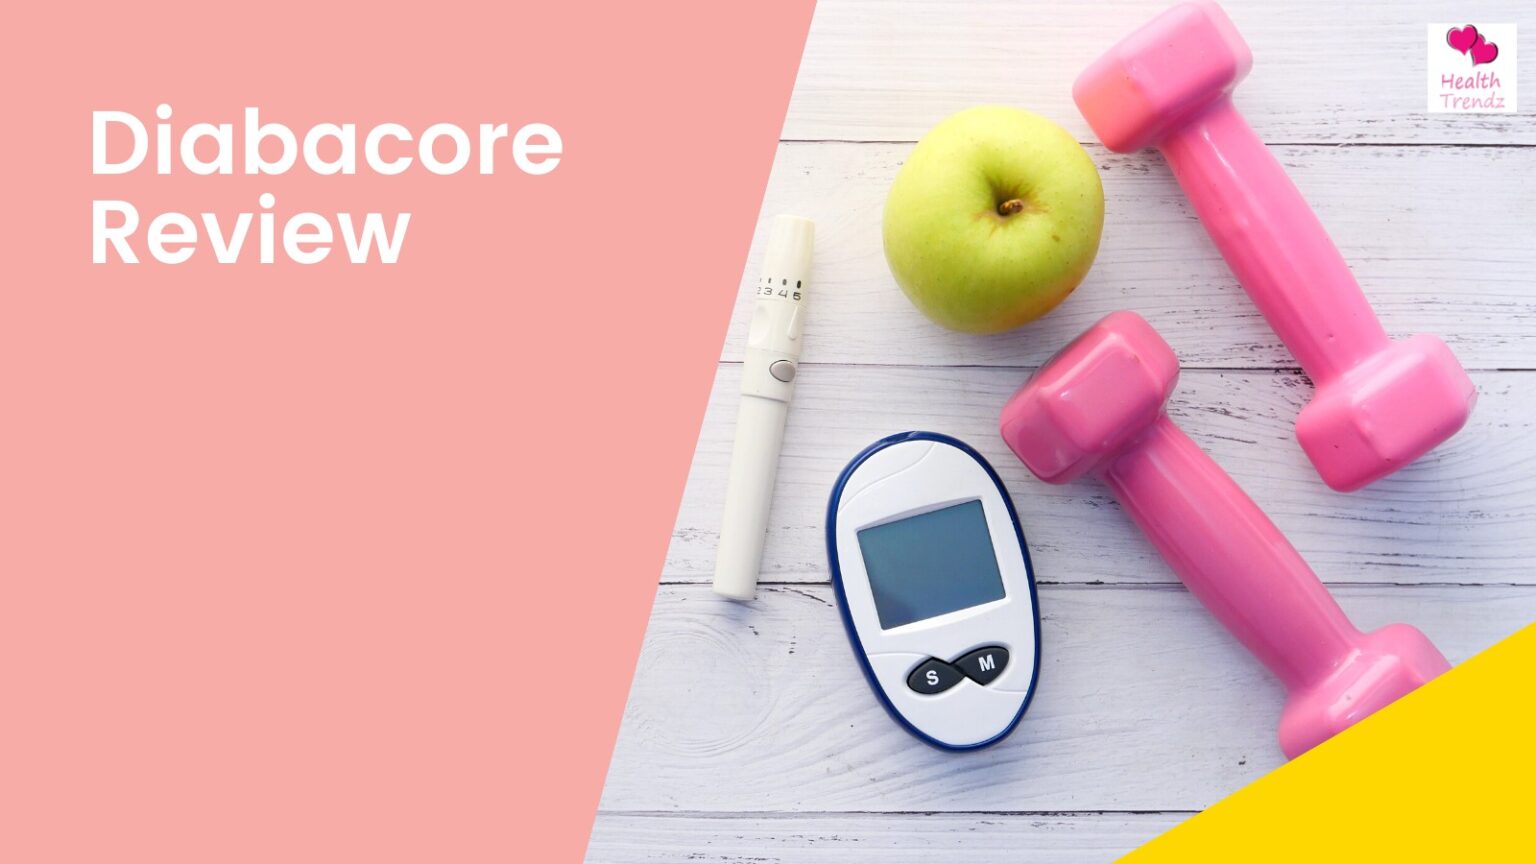 Diabacore is a supplement for high blood sugar levels. Find out if Diabacore is right for you with these reviews.